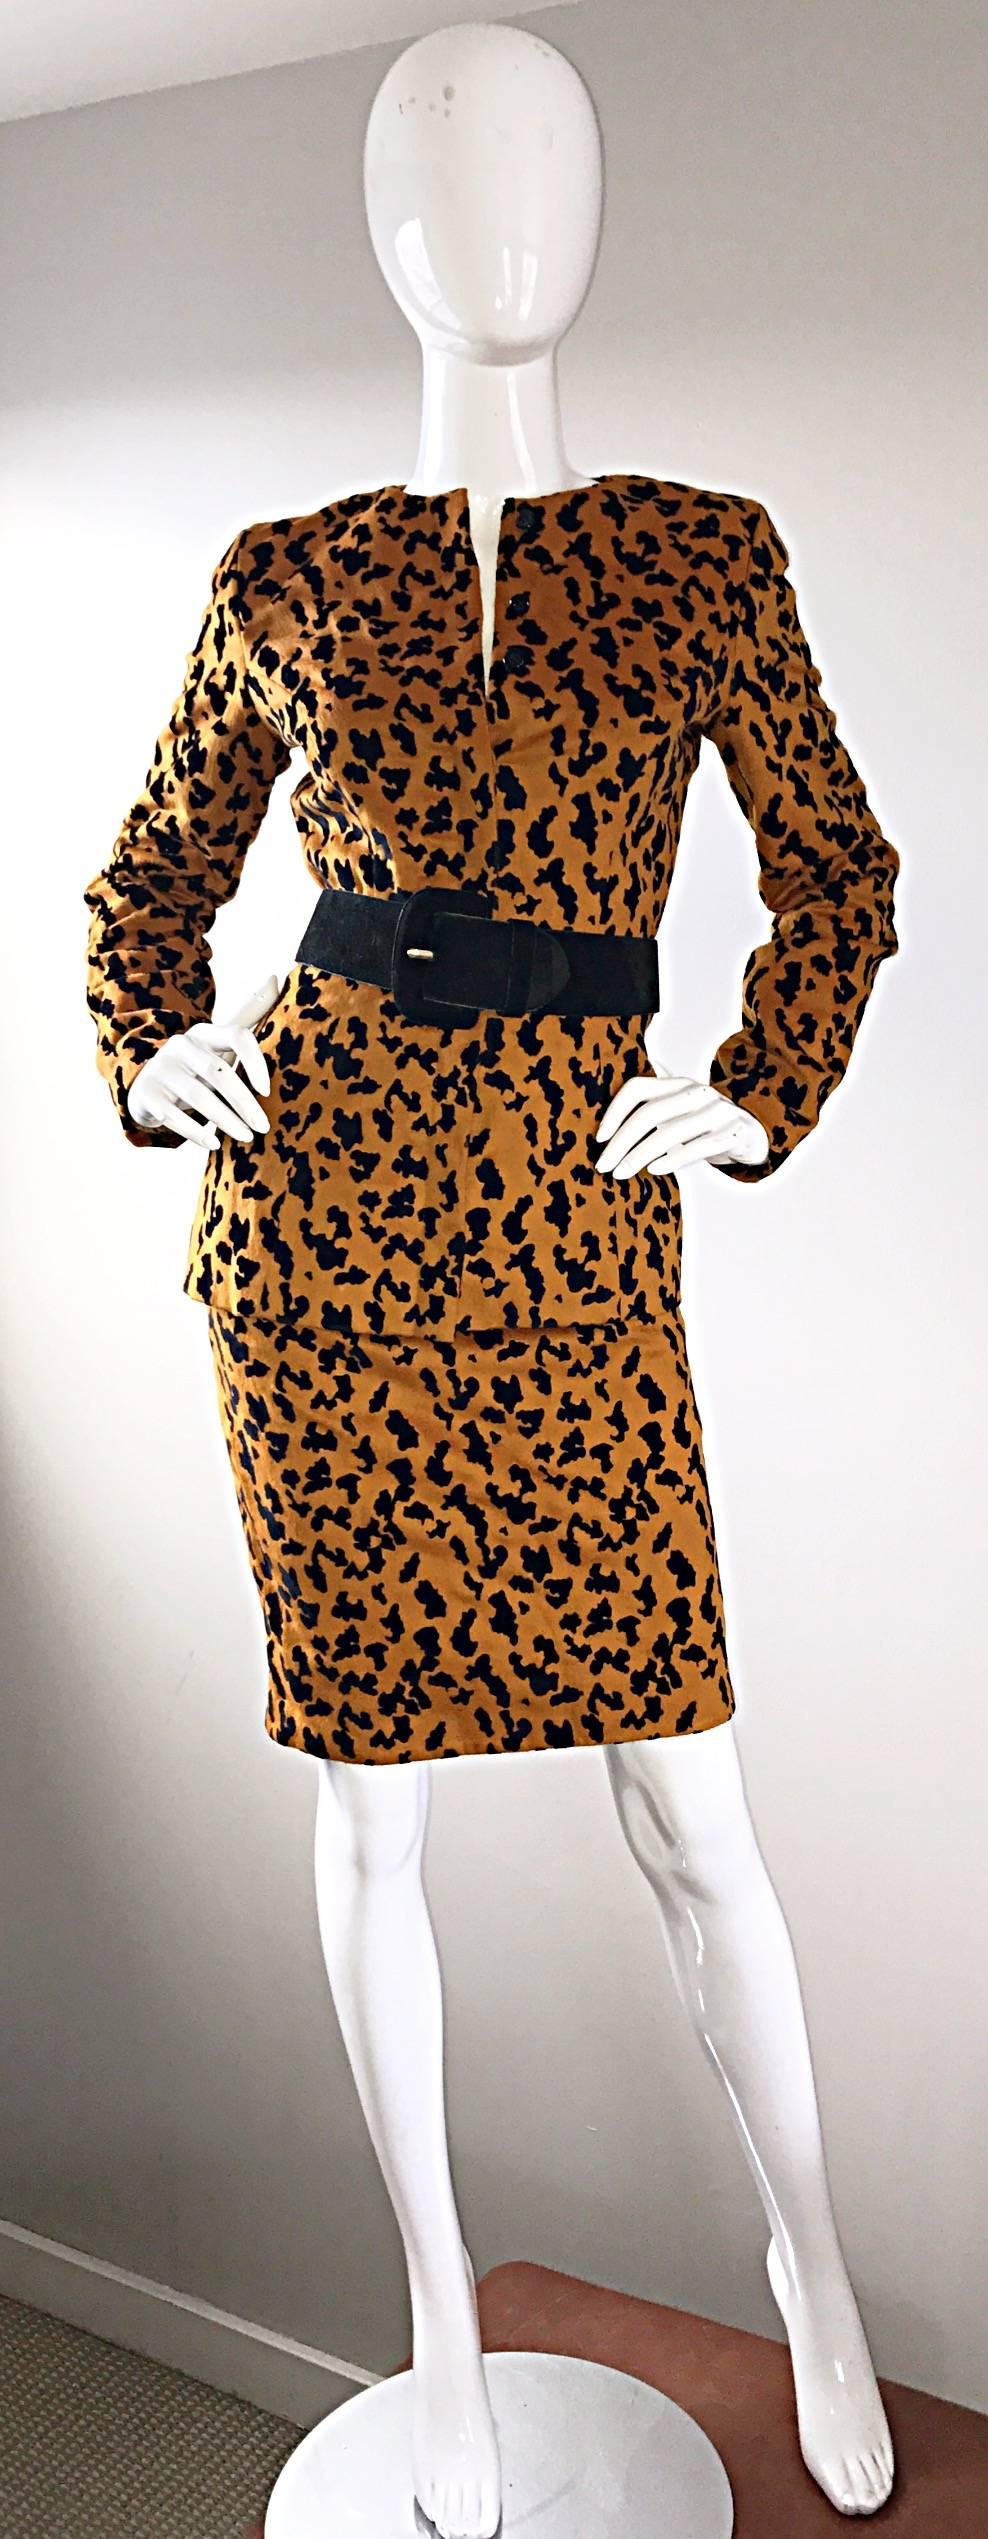 Vintage Vicky Tiel Couture Leopard Cheetah Print Wool Velvet 1980s Skirt Suit  In Excellent Condition For Sale In San Diego, CA